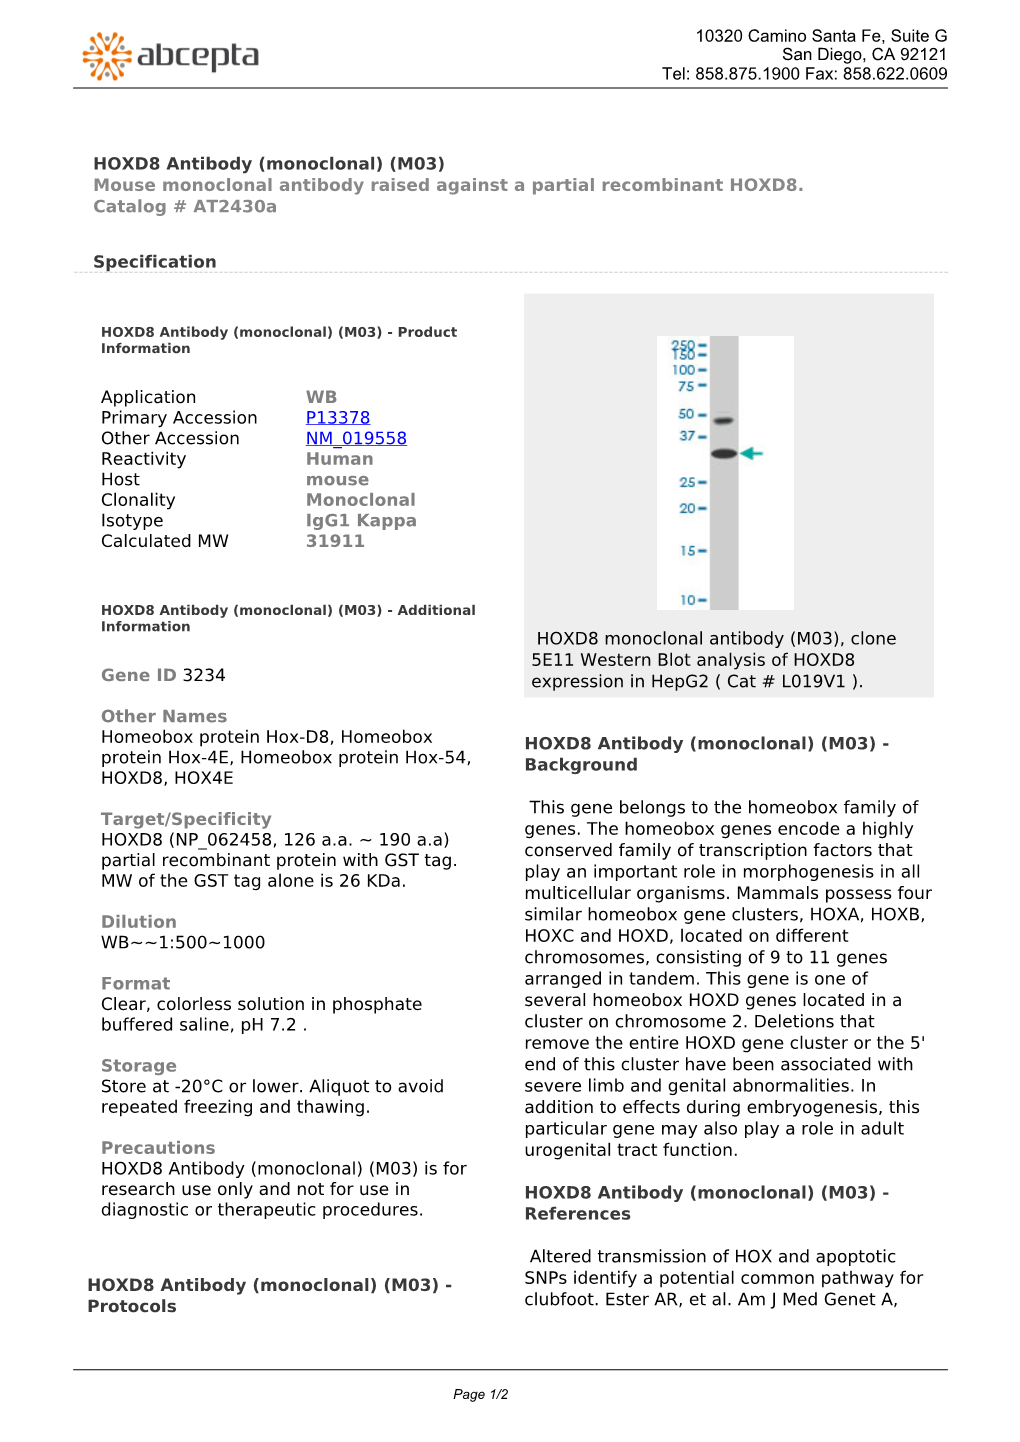 HOXD8 Antibody (Monoclonal) (M03) Mouse Monoclonal Antibody Raised Against a Partial Recombinant HOXD8